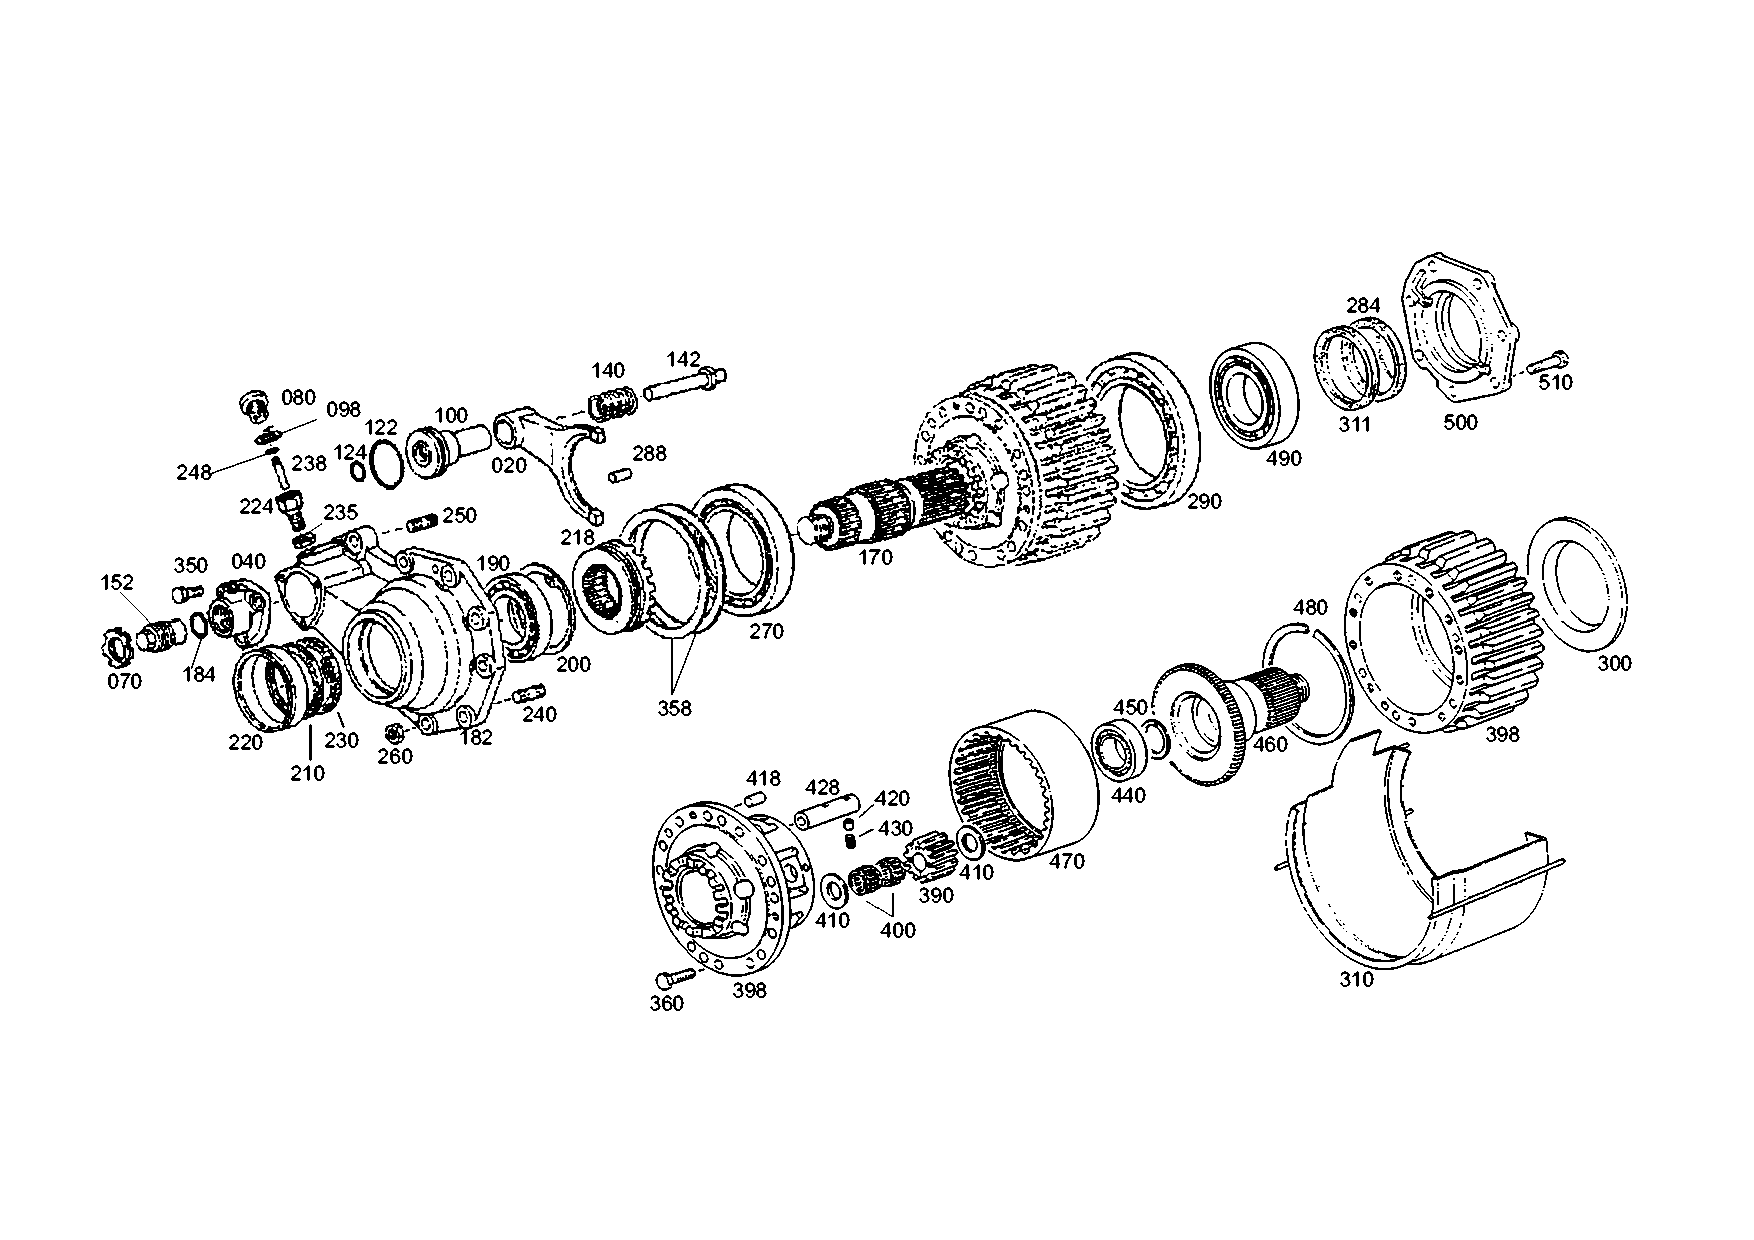 drawing for TITAN GMBH 172000220055 - OUTPUT SHAFT (figure 4)